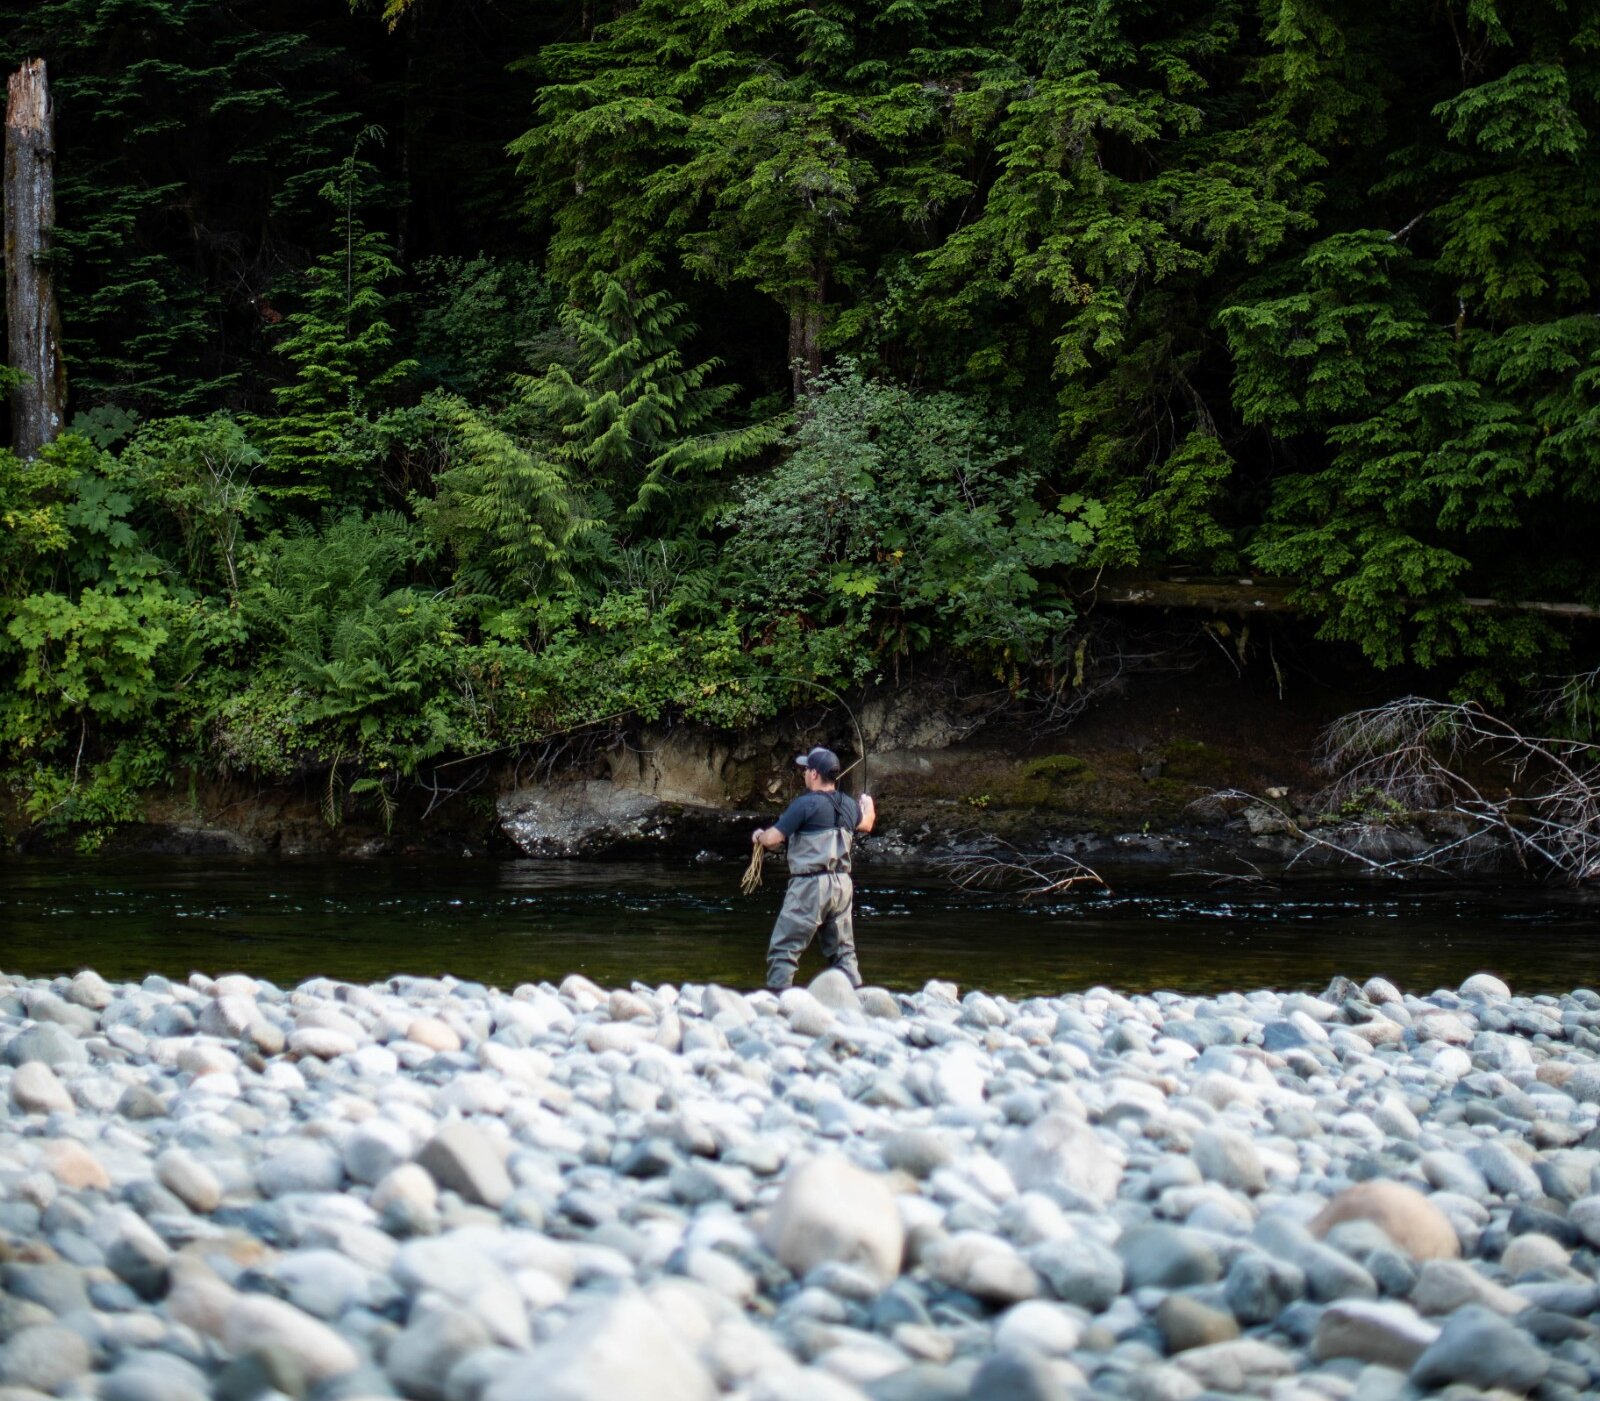 Person fly fishing in the distance along a rocky river bank with forest in the background